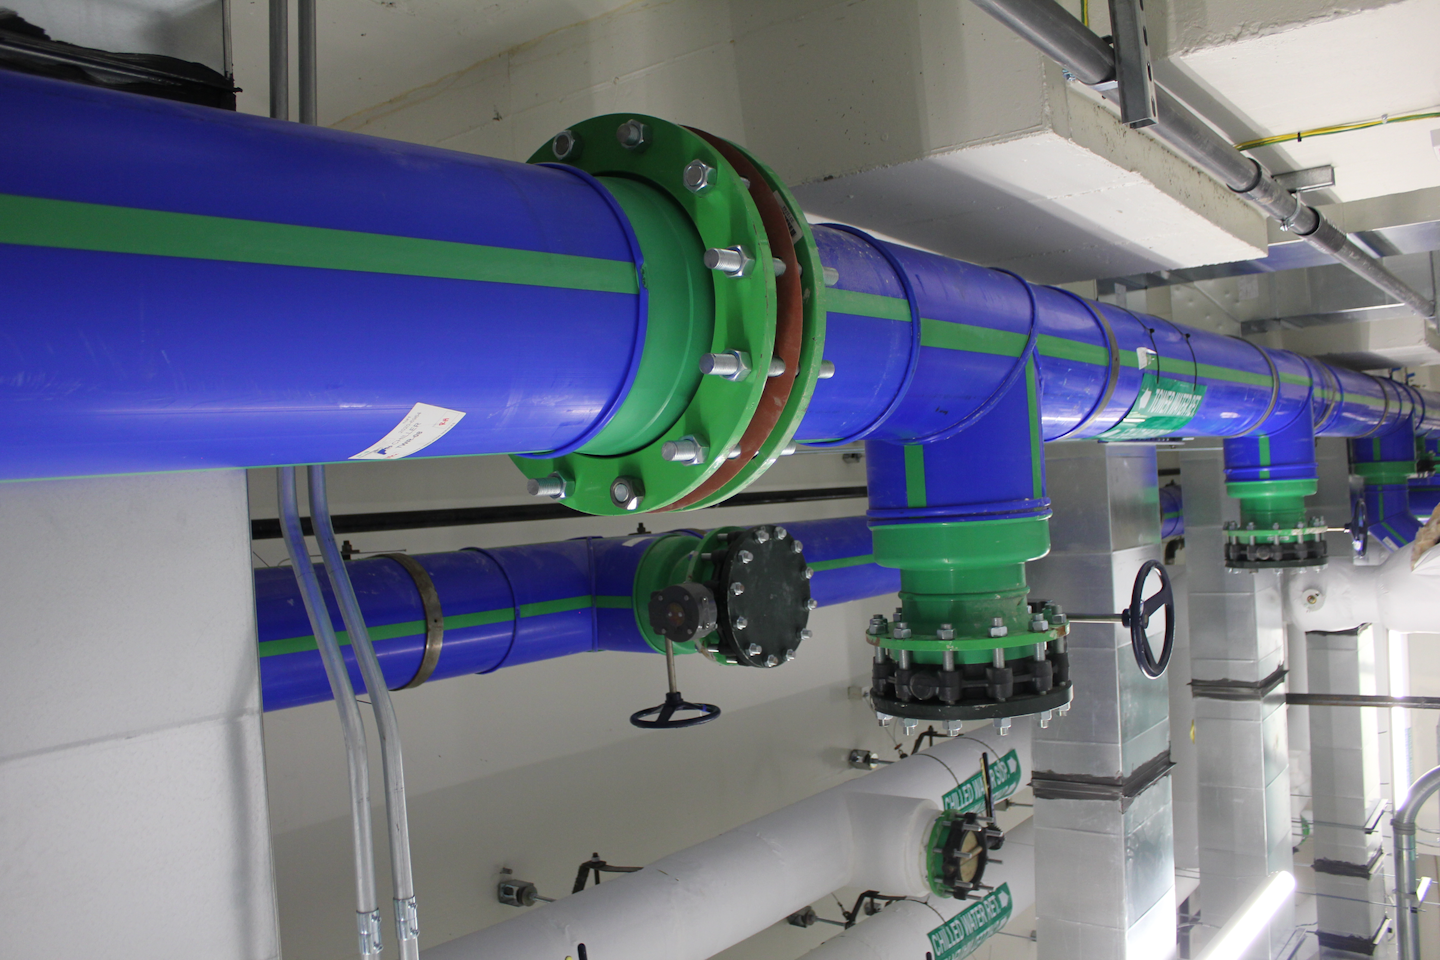 Aquatherm pipe in sizes up to 14-in. was used for the chilled and domestic water at Bozeman Health Hospital’s new ICU tower.